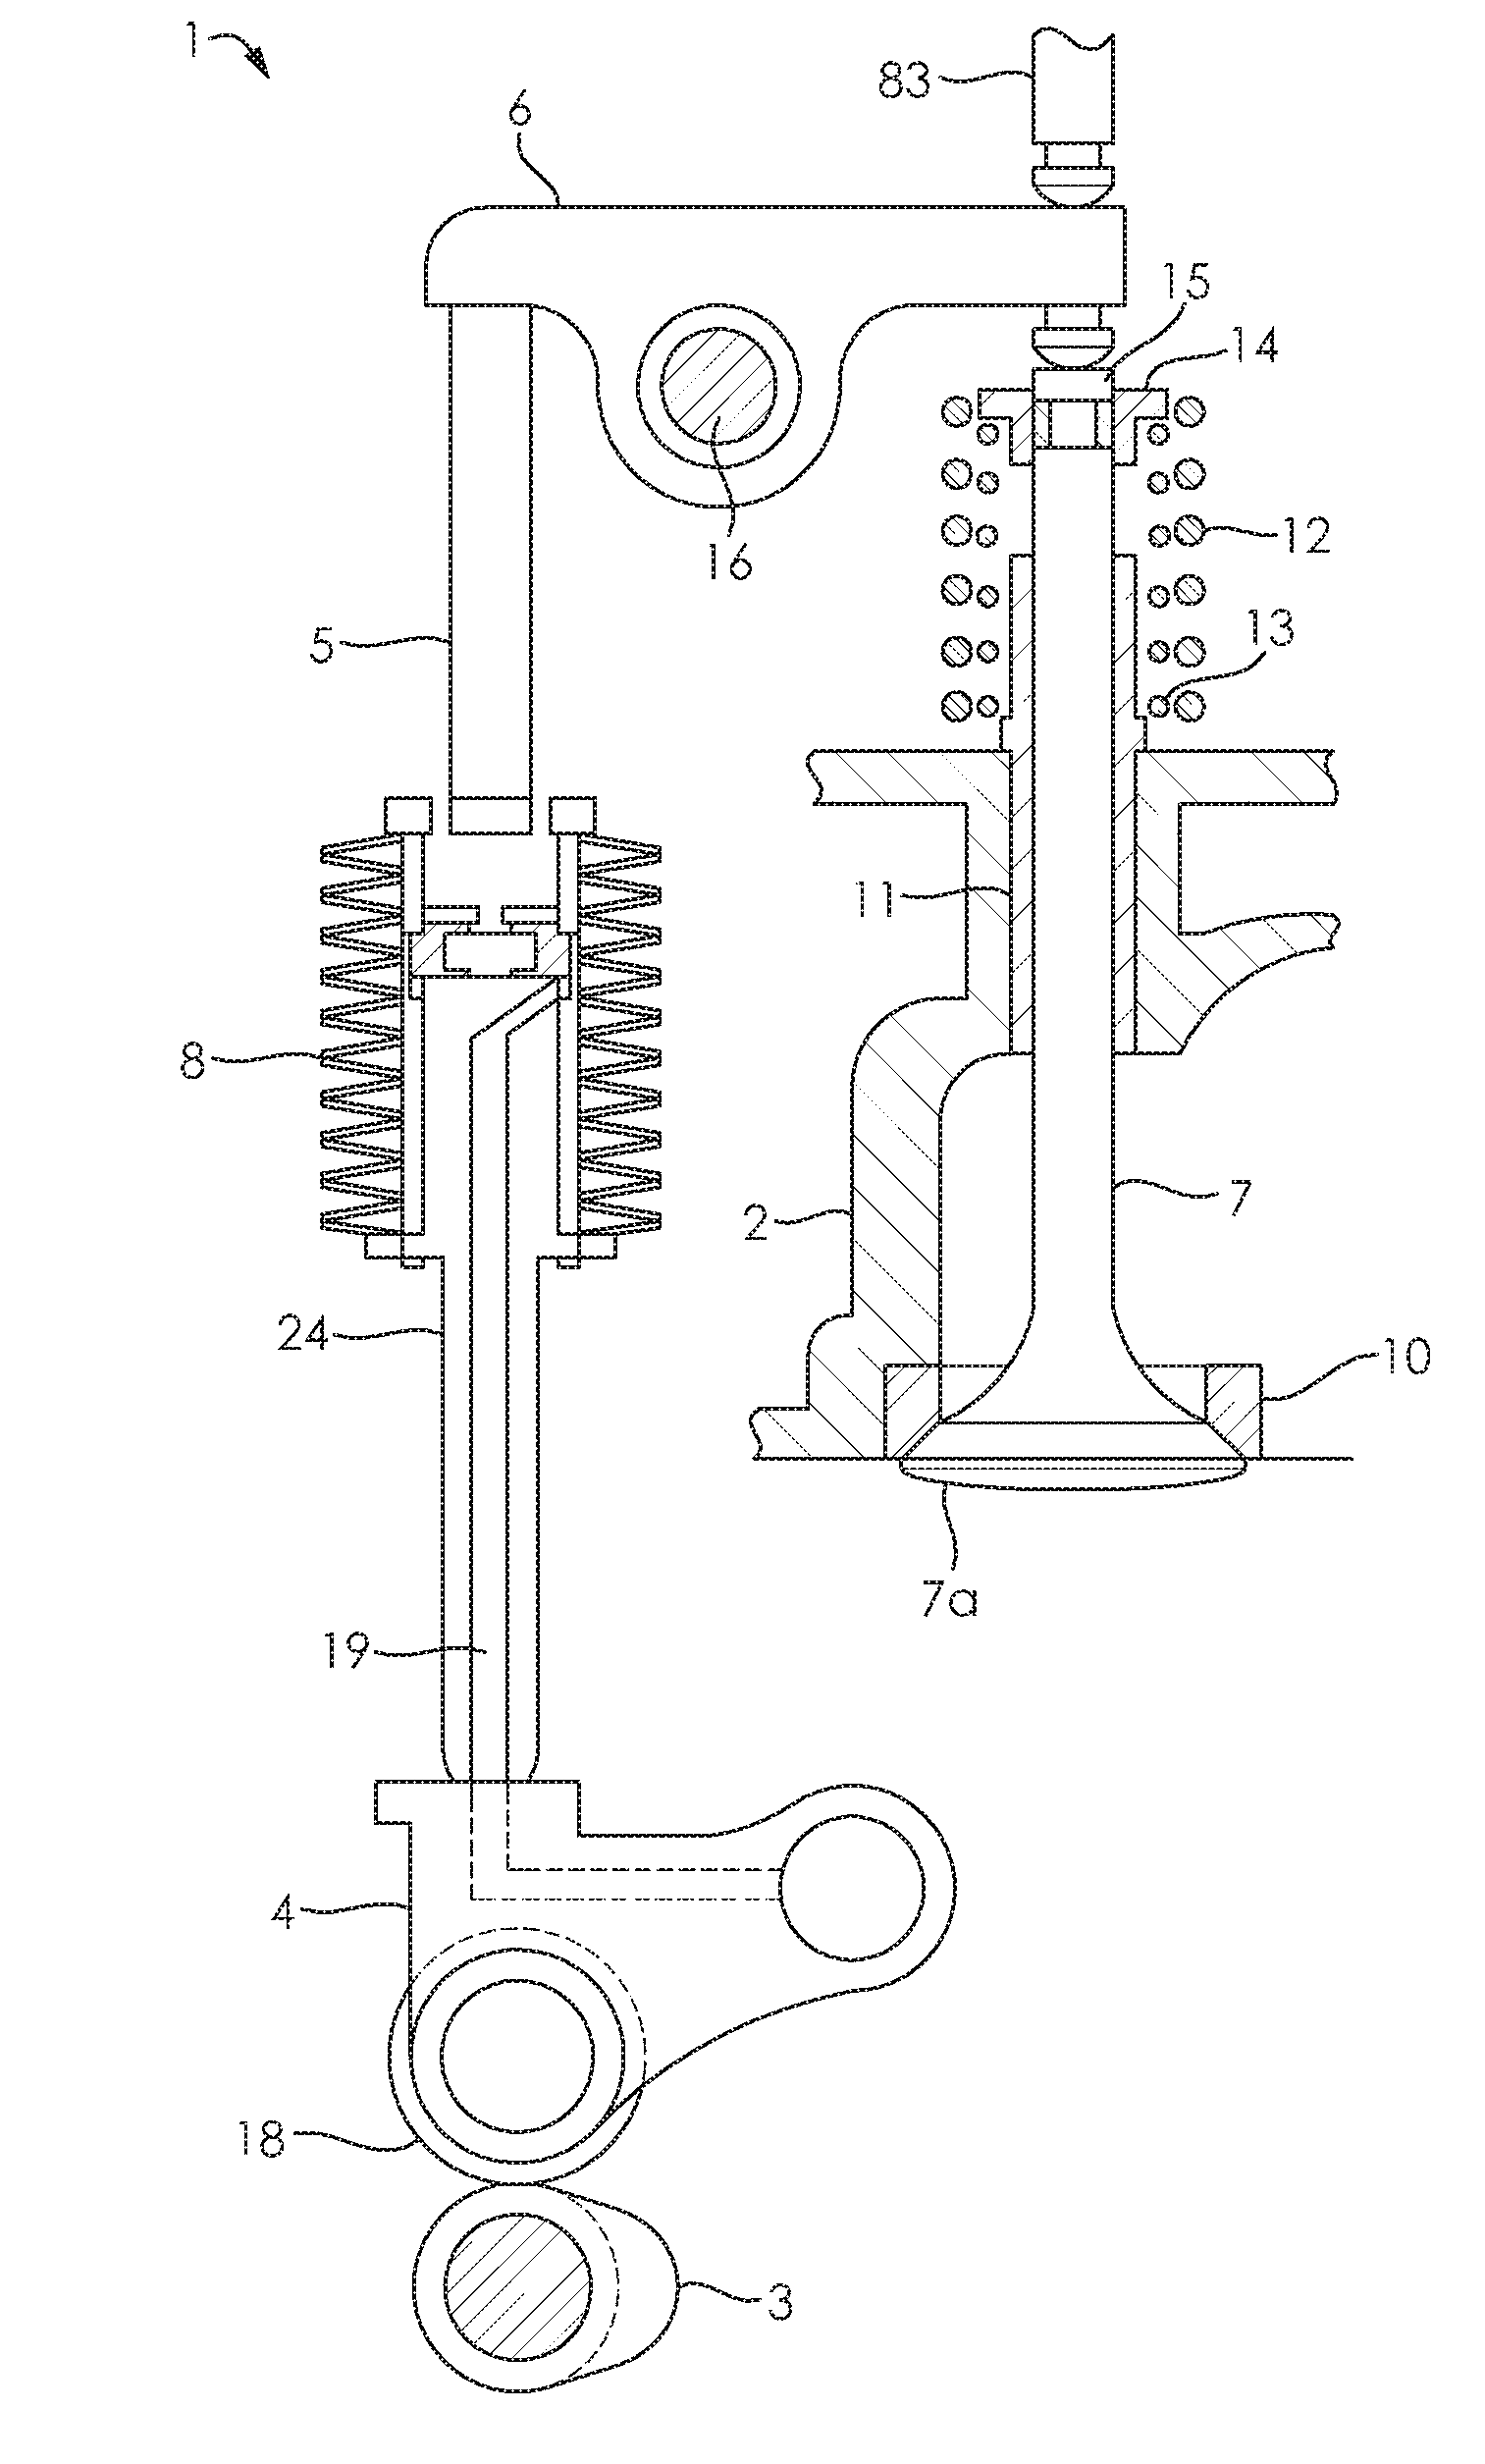 Collapsible pushrod valve actuation system for a reciprocating piston machine cylinder